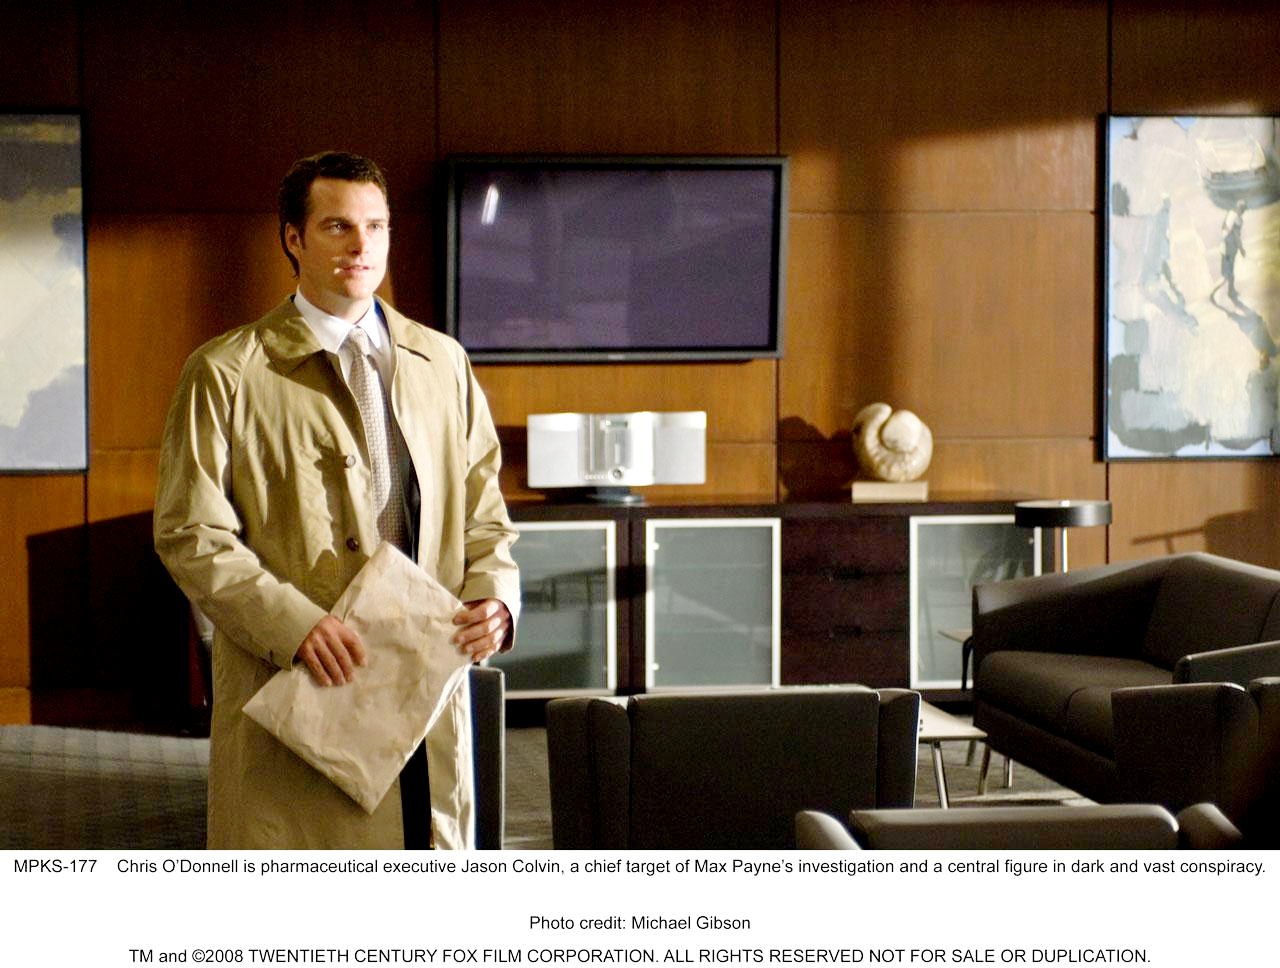 Chris O'Donnell stars as Jason Colvin in The 20th Century Fox's Max Payne (2008). Photo credit by Michael Gibson.